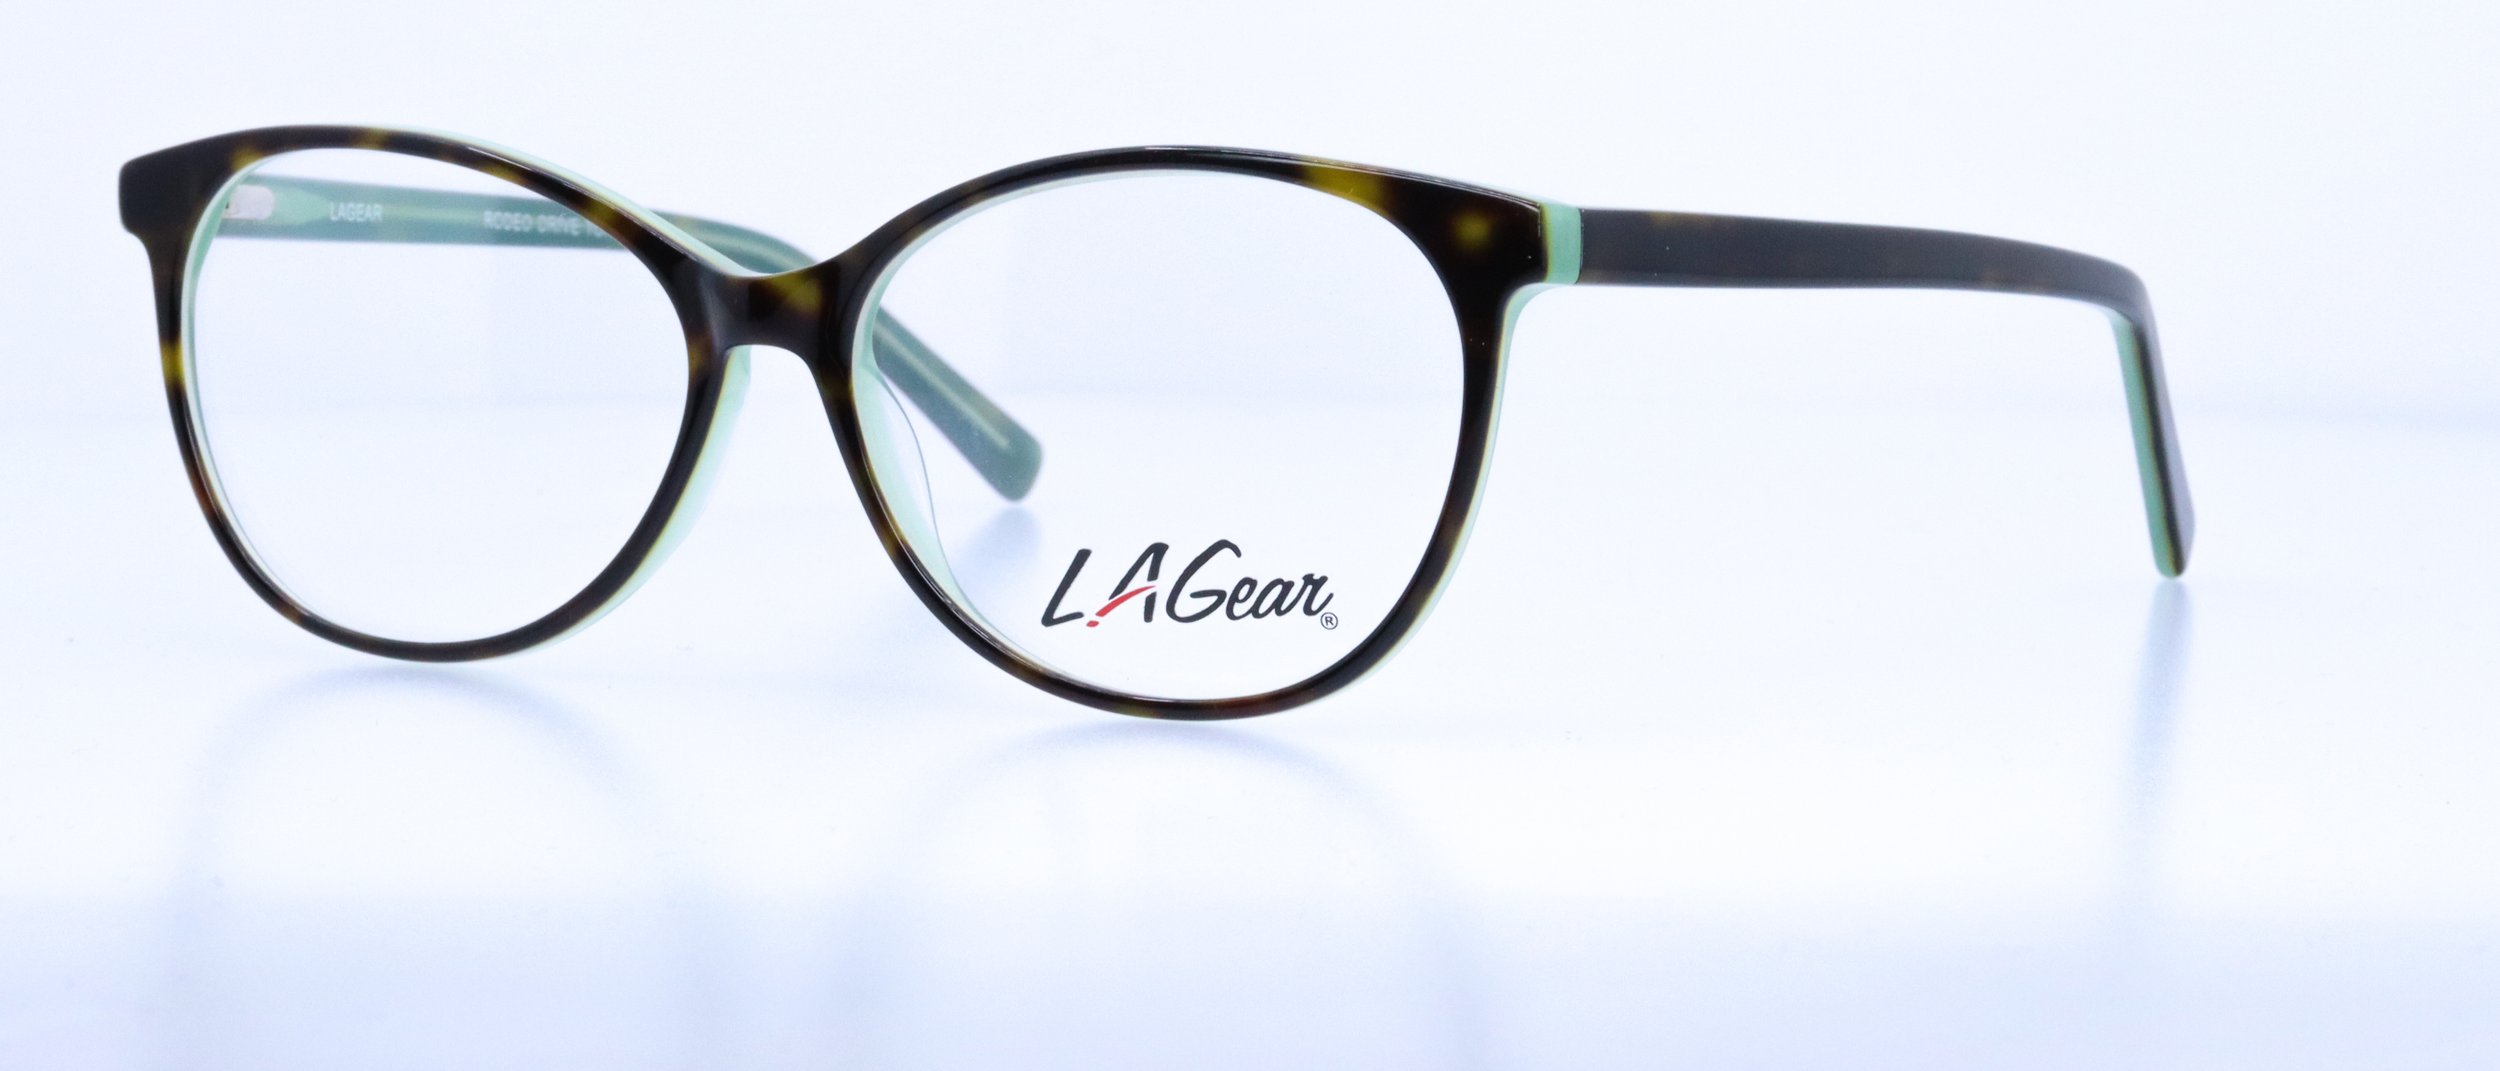  Rodeo Drive: 55-15-140, Available in Tortoise/Blue or Tortoise/Green 